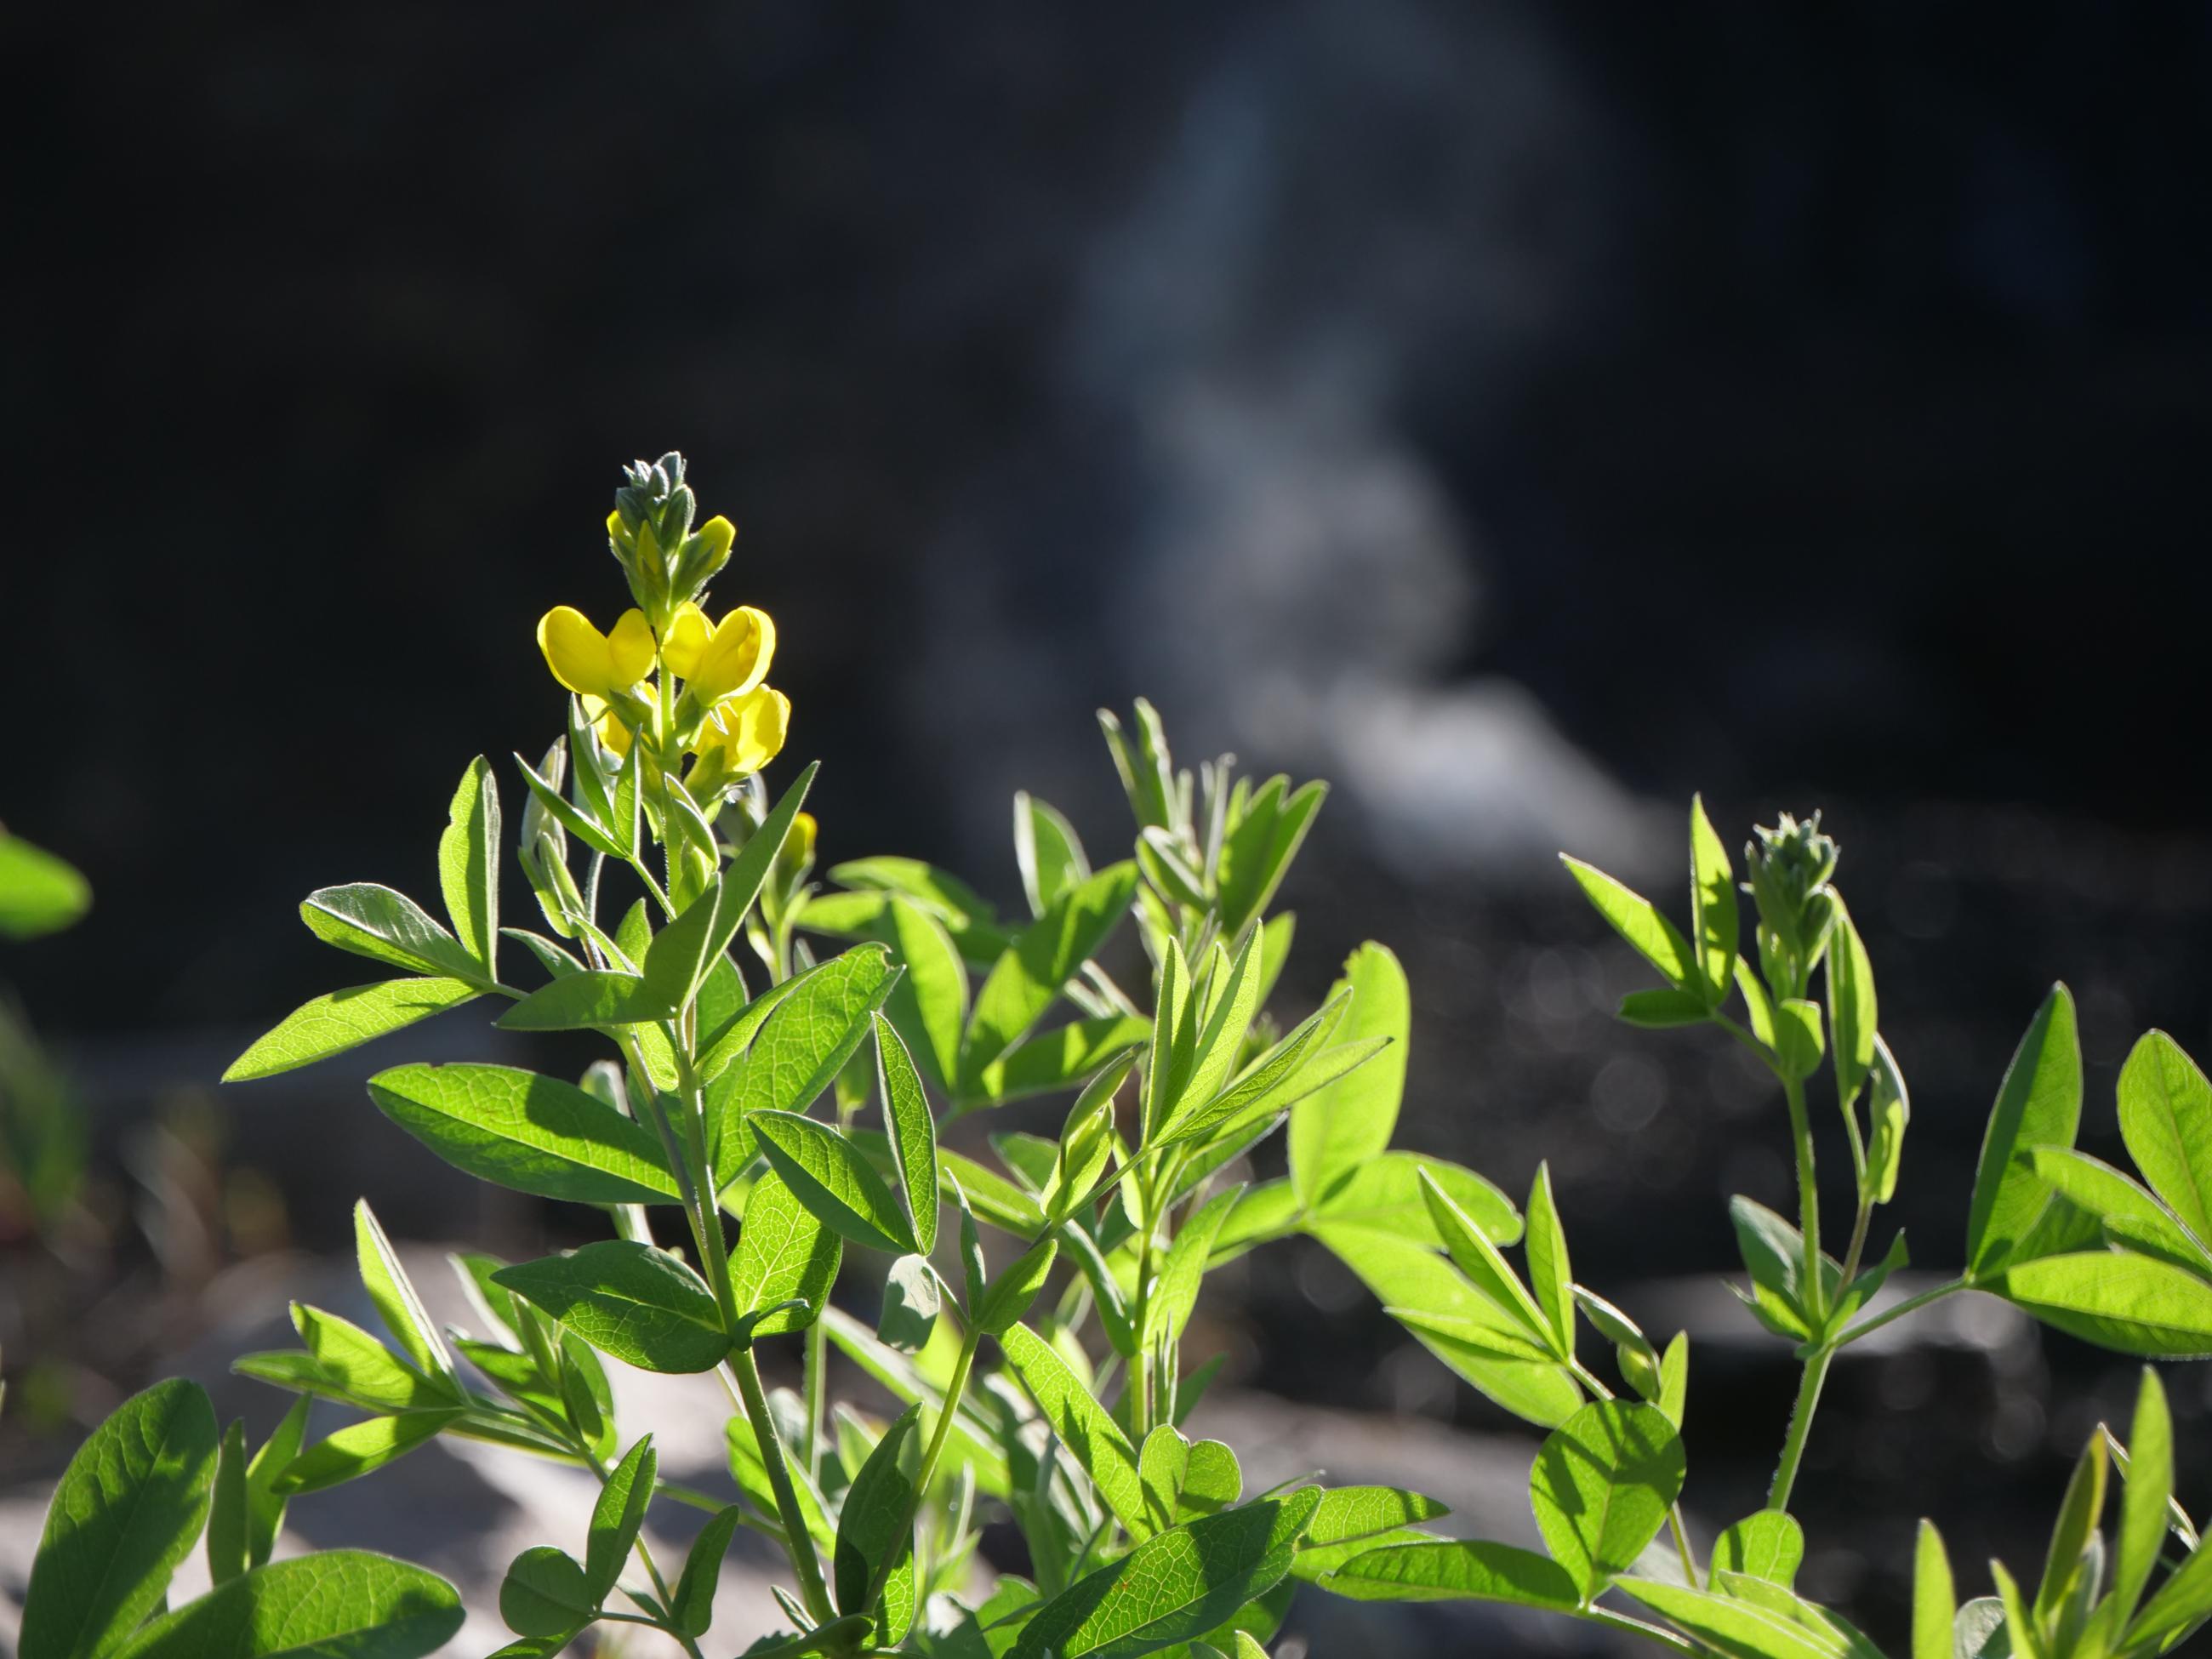 Yellow flowers and green foliage are in focus in the foreground with a wisp of smoke is seen in the background.